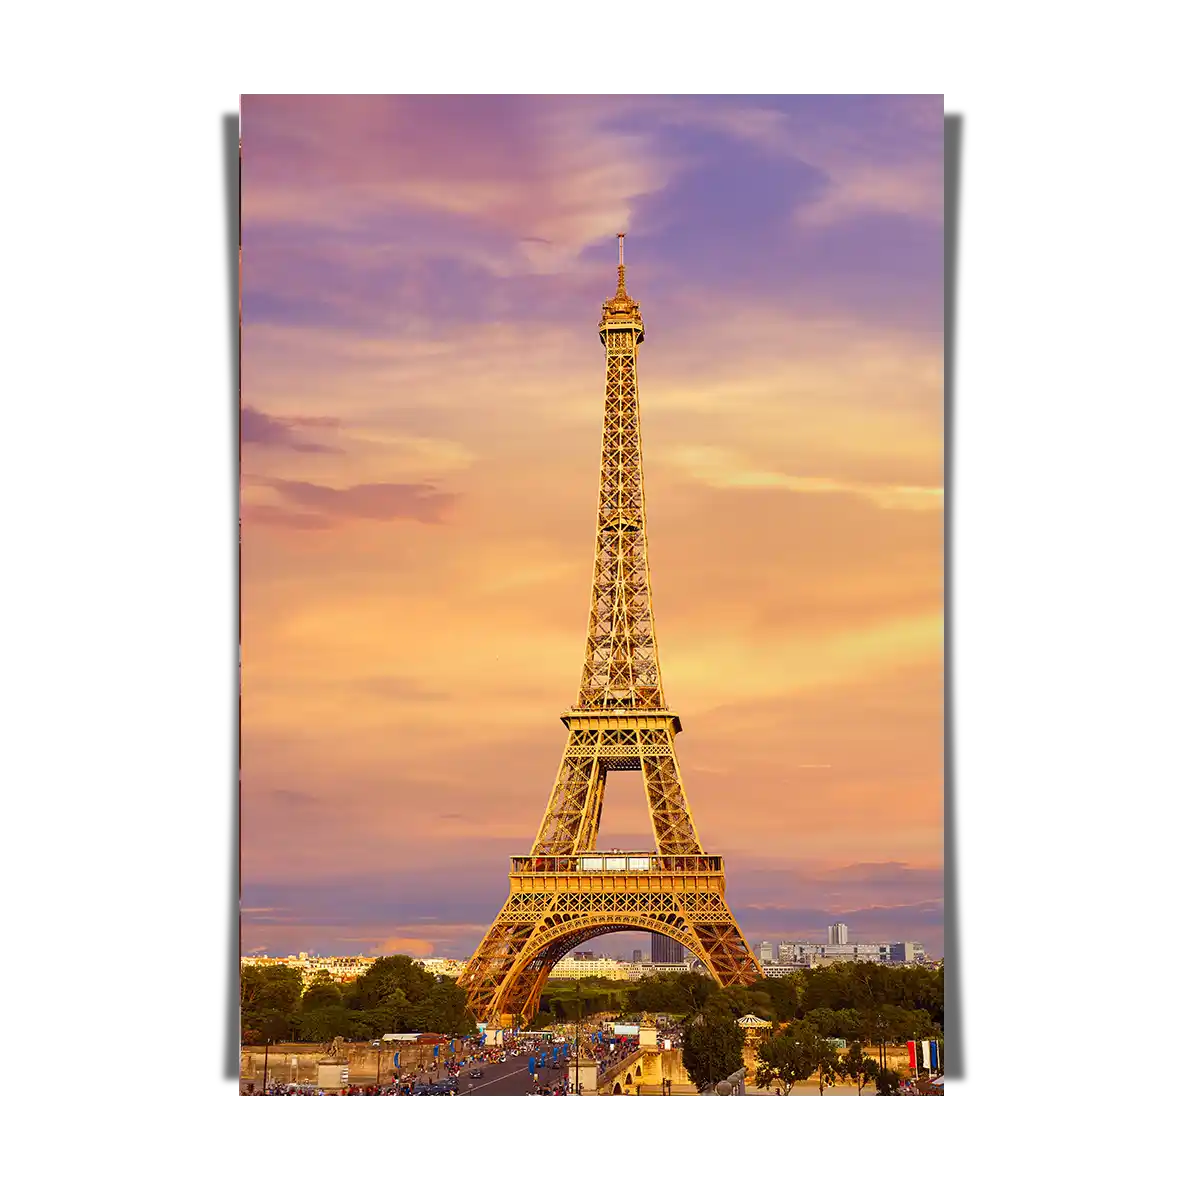 The Eiffel Tower Paris France at Sunset